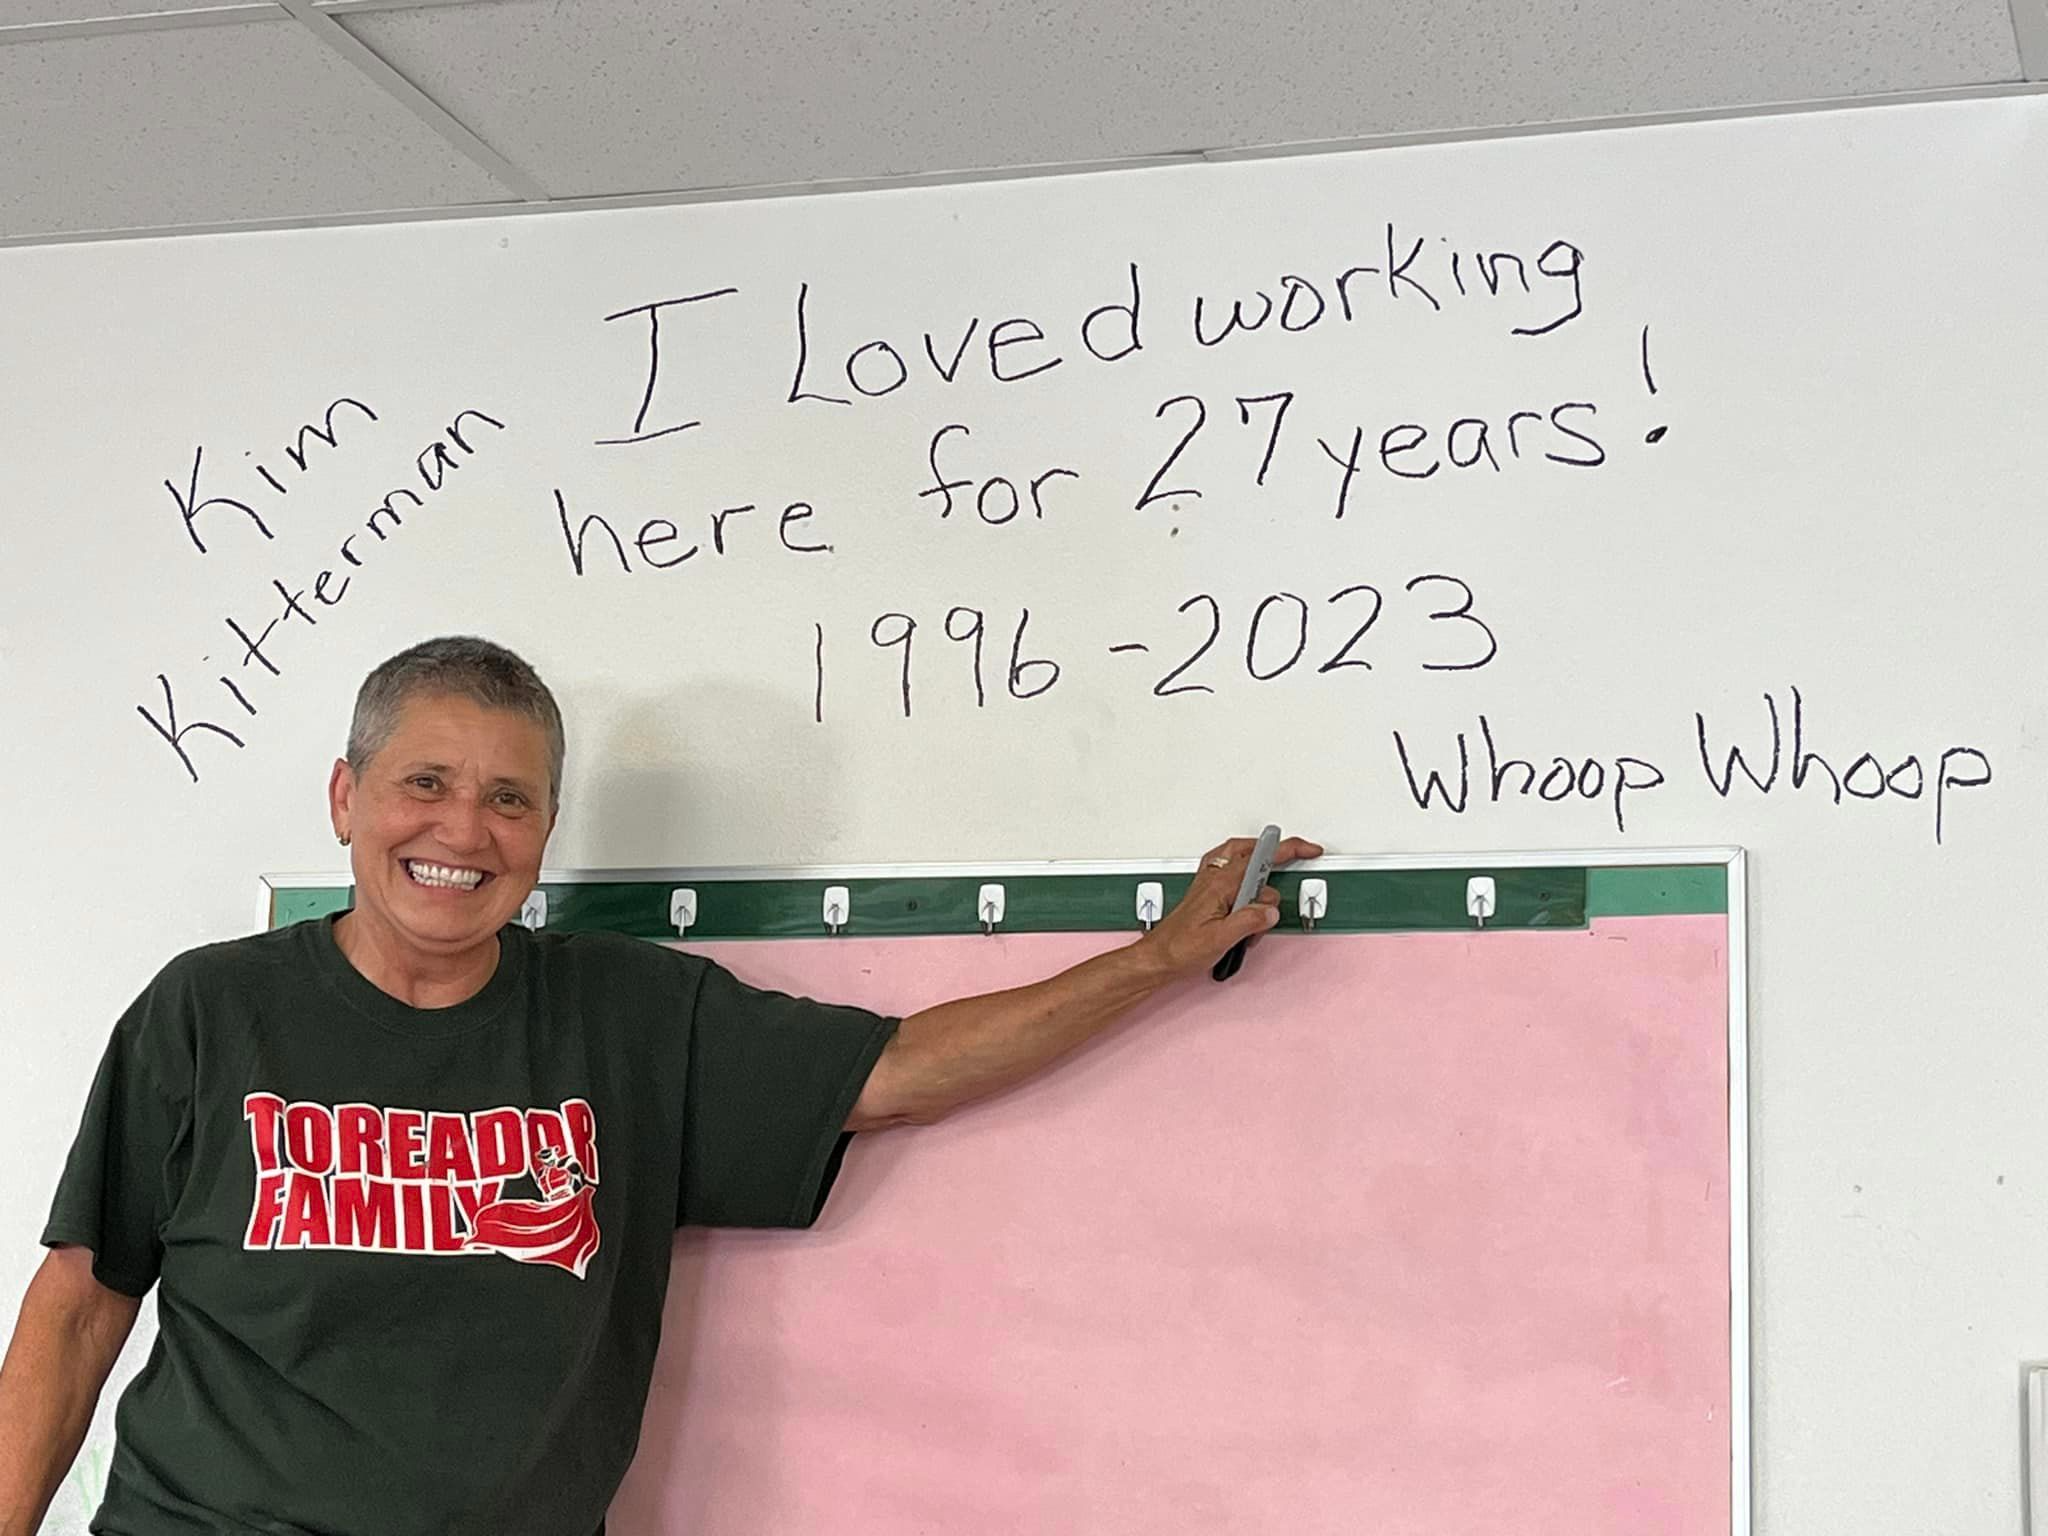 Director Kim Kitterman standing at a wall where it reads: I loved working here for 27 years 1996-2023 whoop whoop